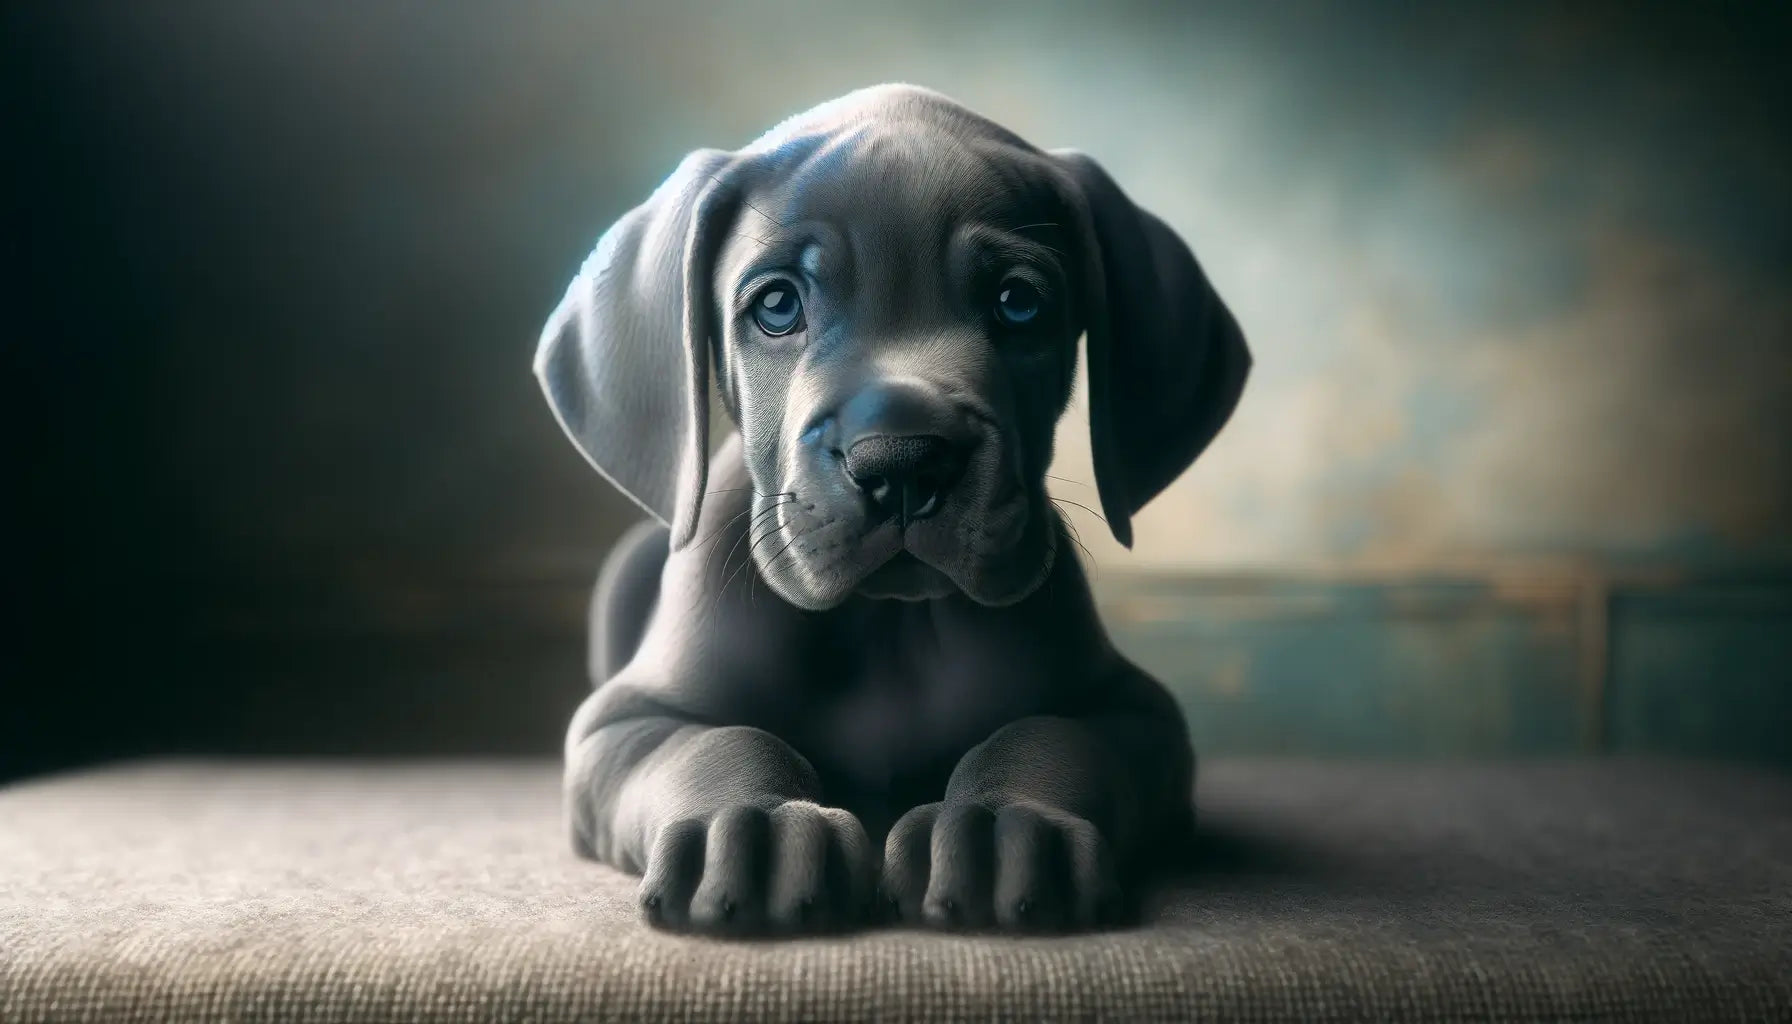 Blue Great Dane puppy's youthful features with its small size, floppy ears, and puppy eyes capturing the adorable essence of the breed.